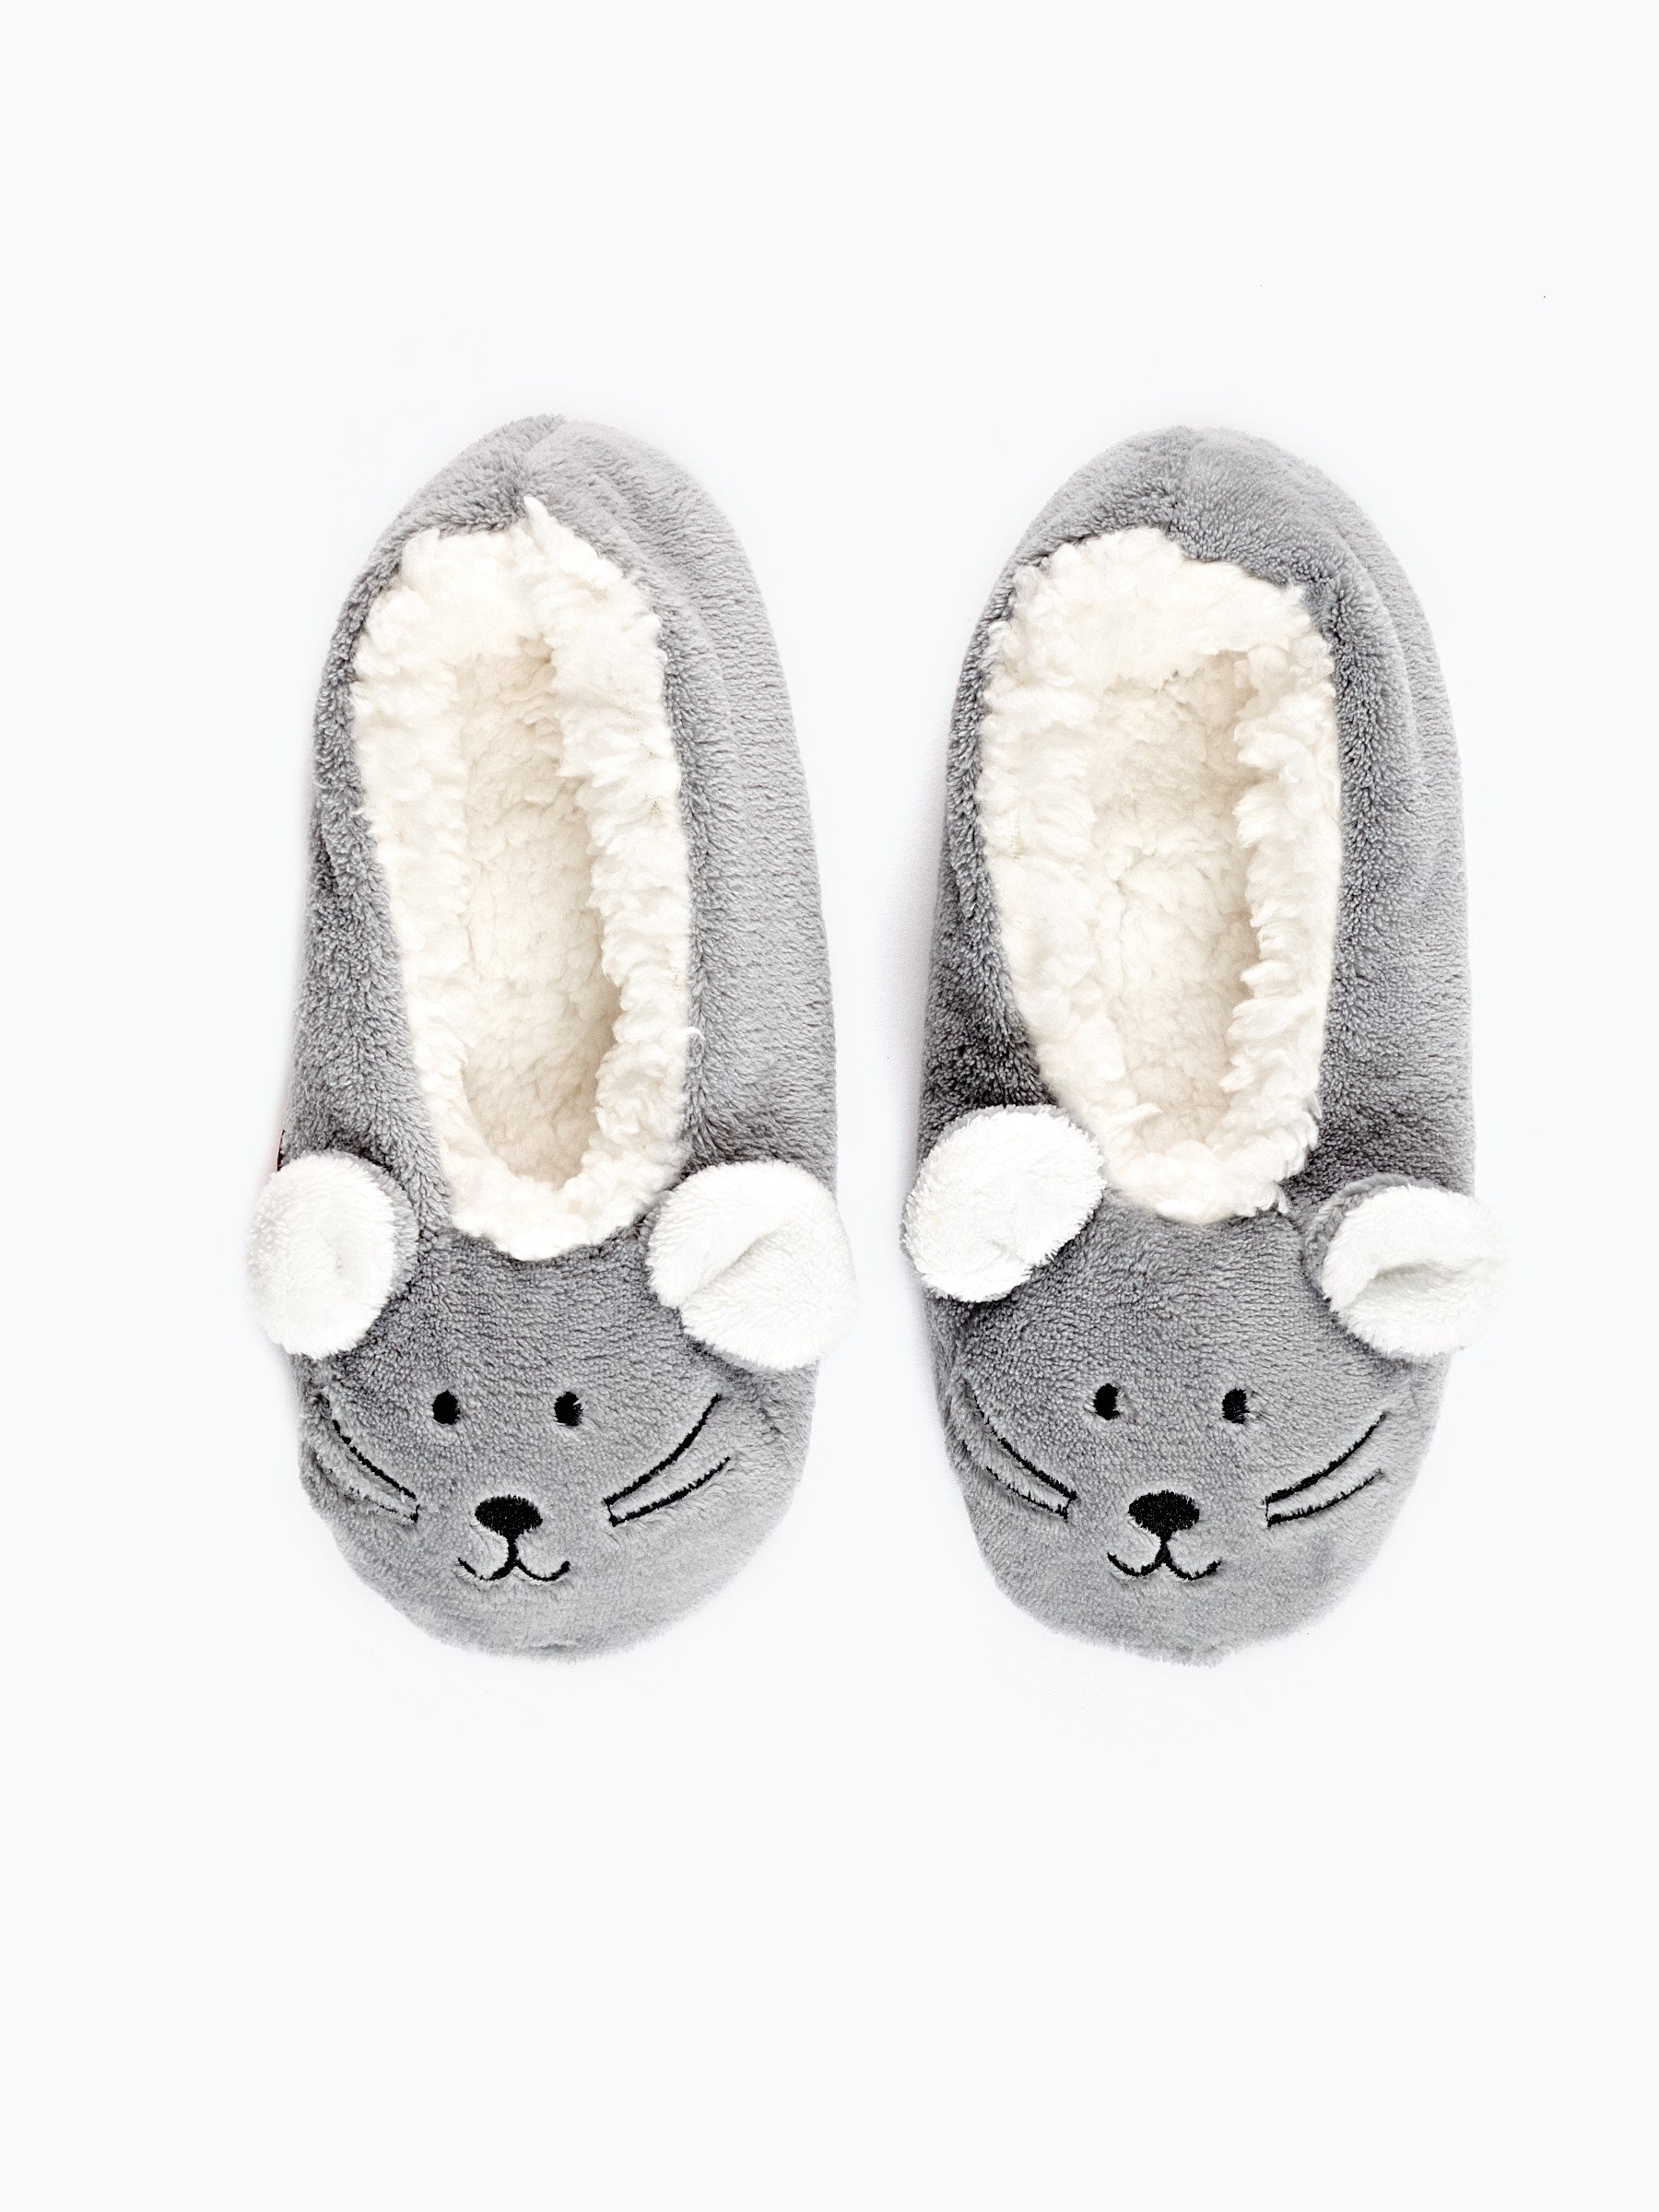 BOYS SLIPPERS - William Lamb Group